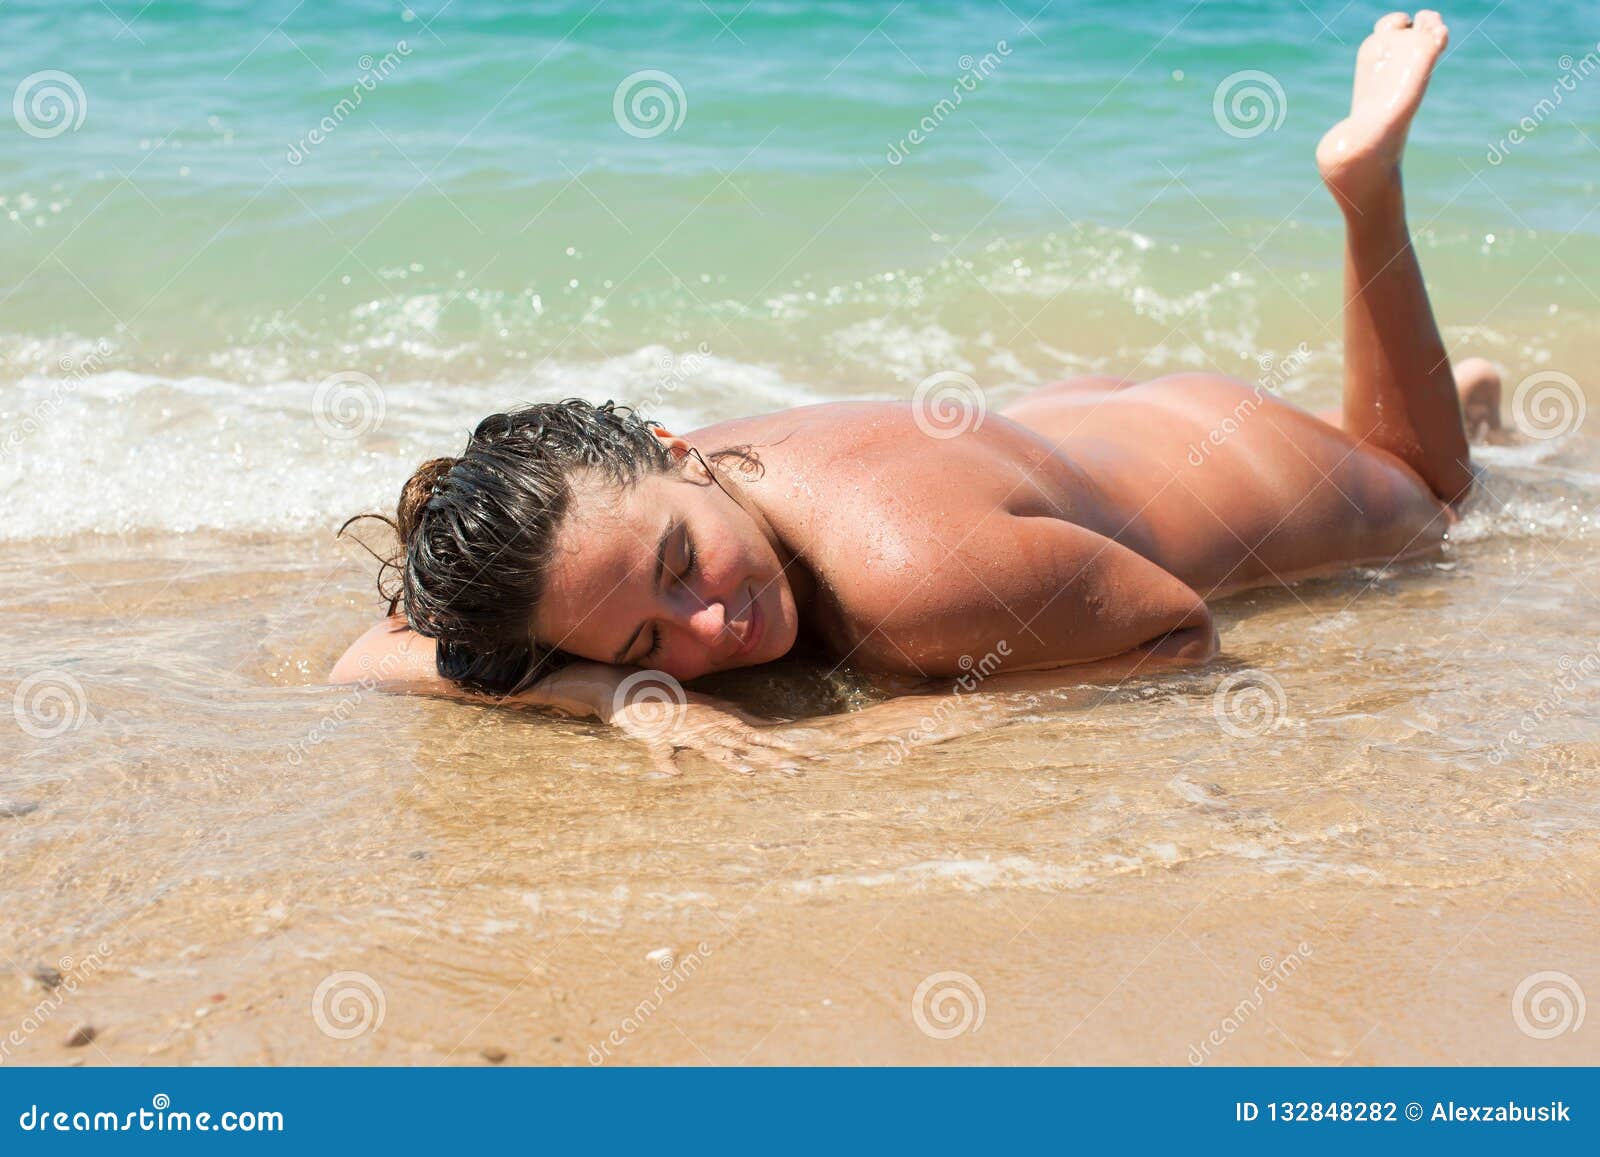 Female Person Resting on Pebble-sandy Beach Stock Photo - Image of adult,  front: 132848282